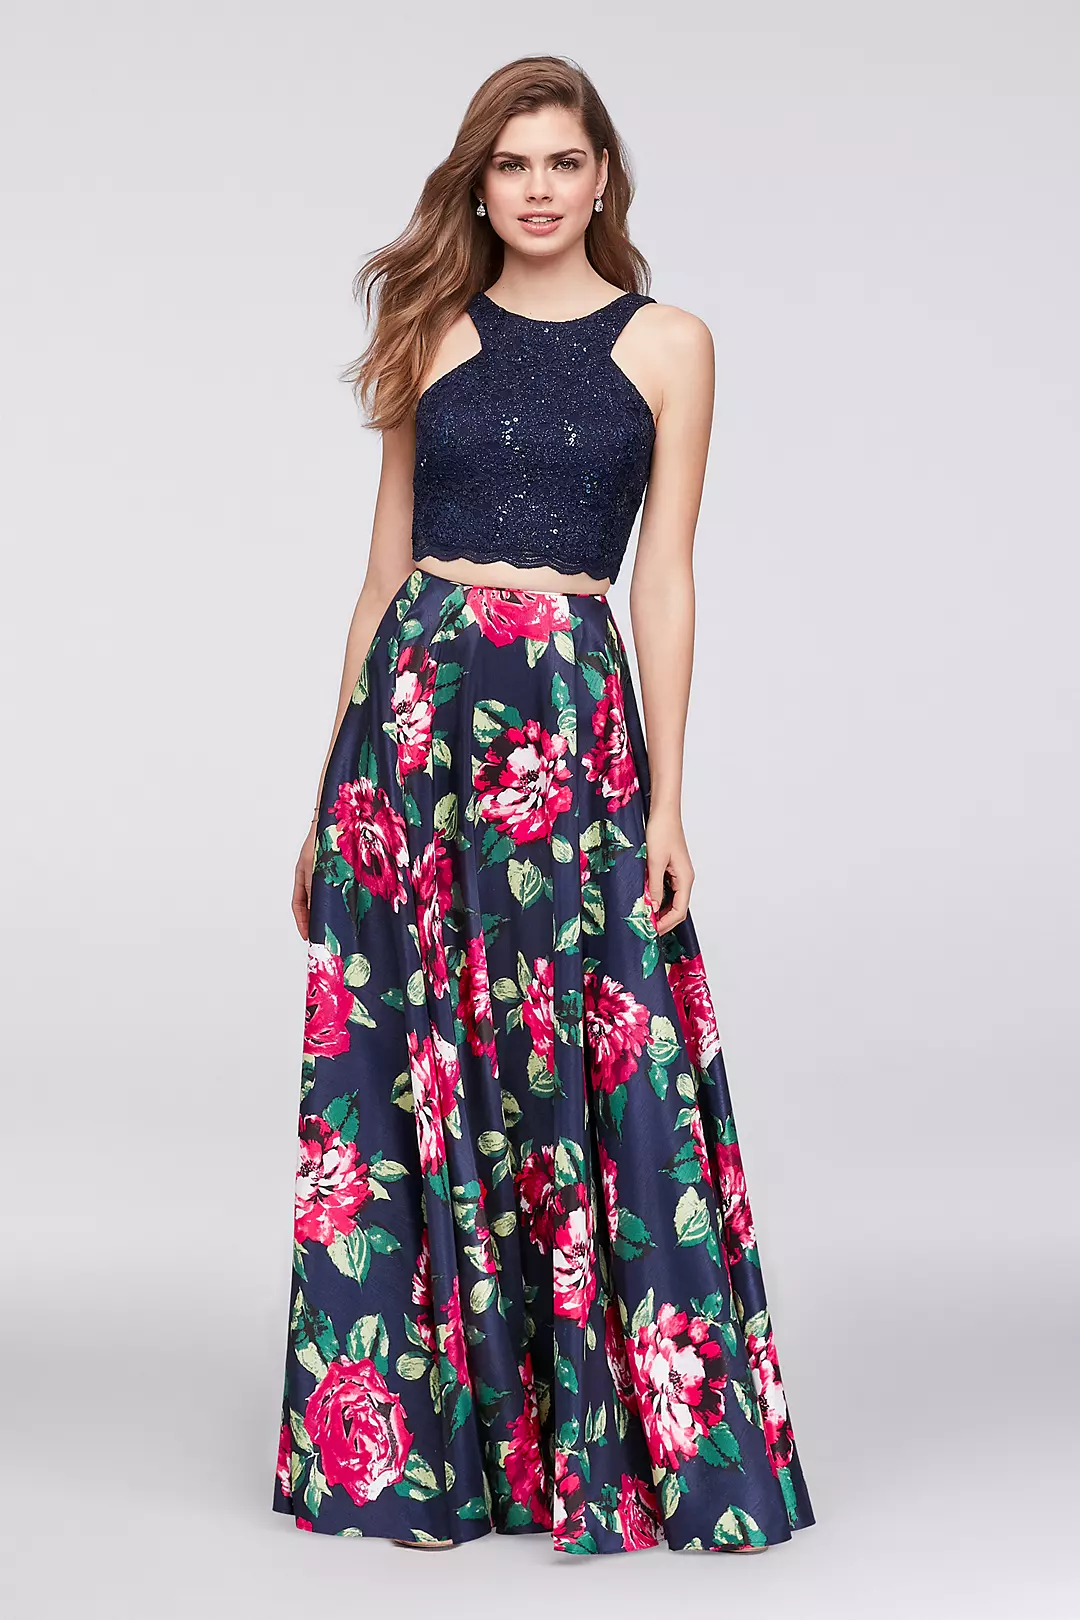 Sequin Lace Two-Piece Dress with Floral Skirt Image